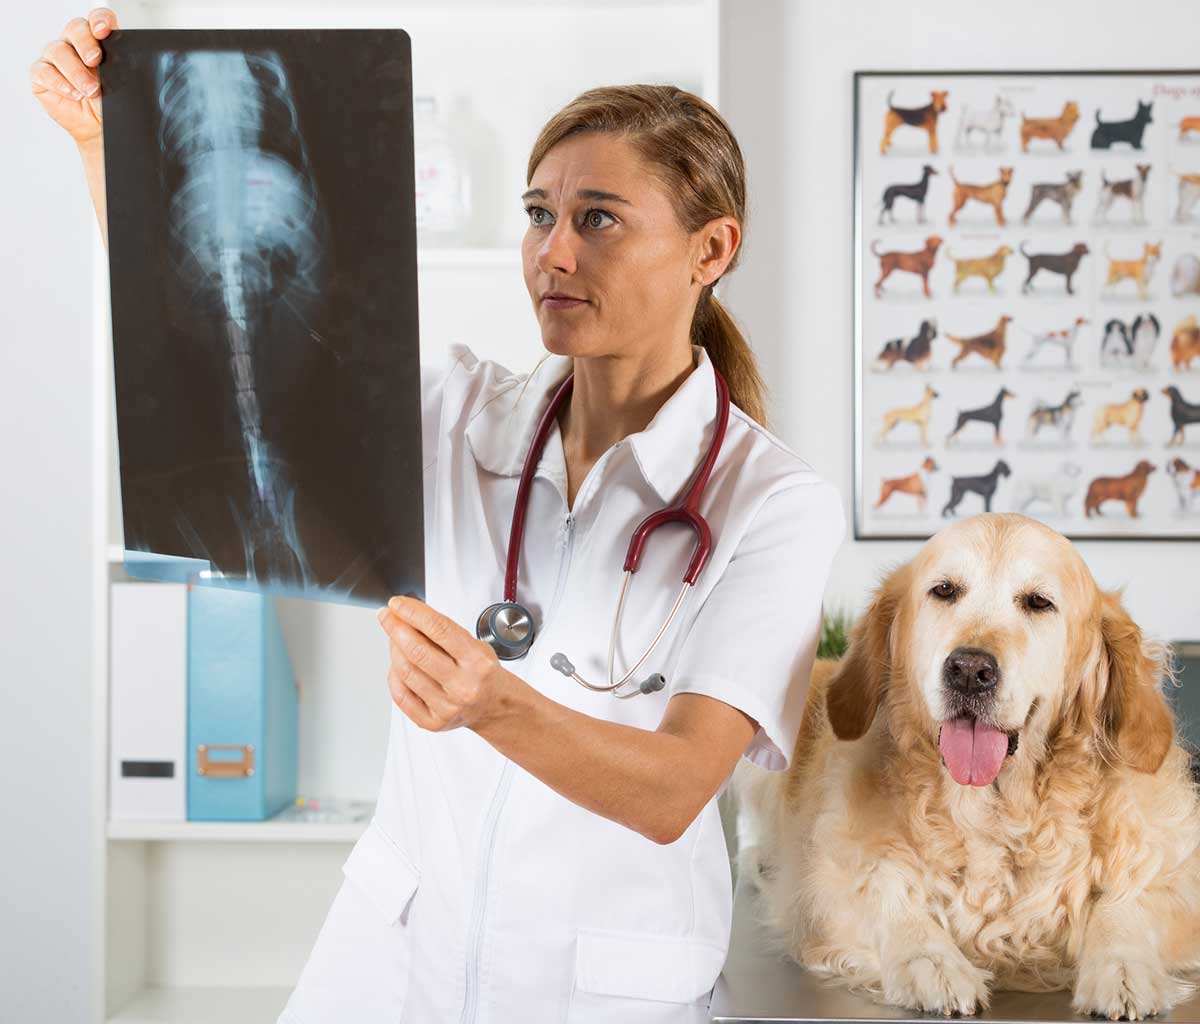 Vet Radiography, Ultrasound and Imaging